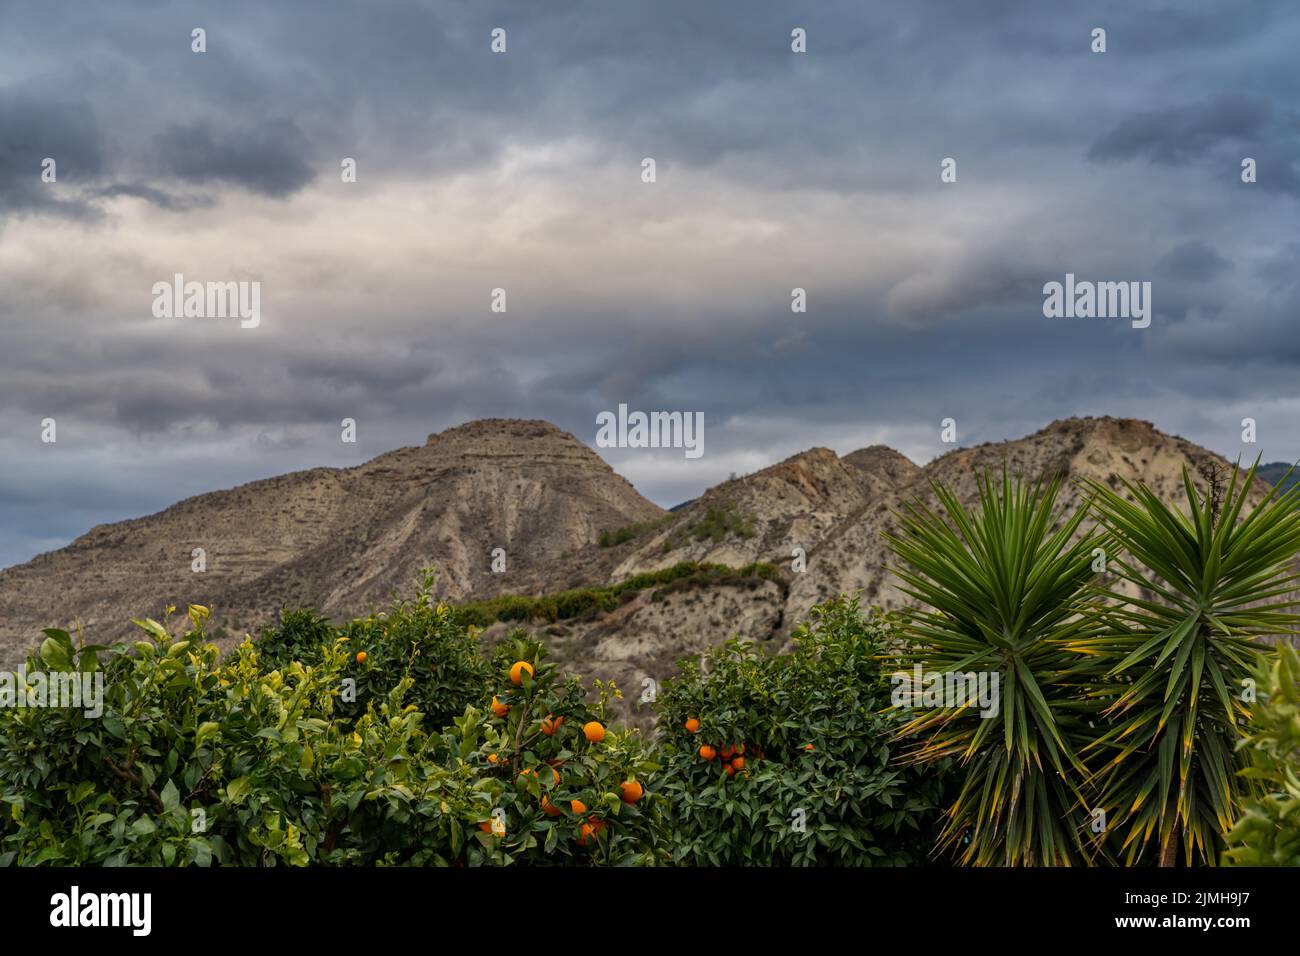 A desert mountain landscape in Andalusia under stormy skies with palm trees and orange orchard in the foreground Stock Photo